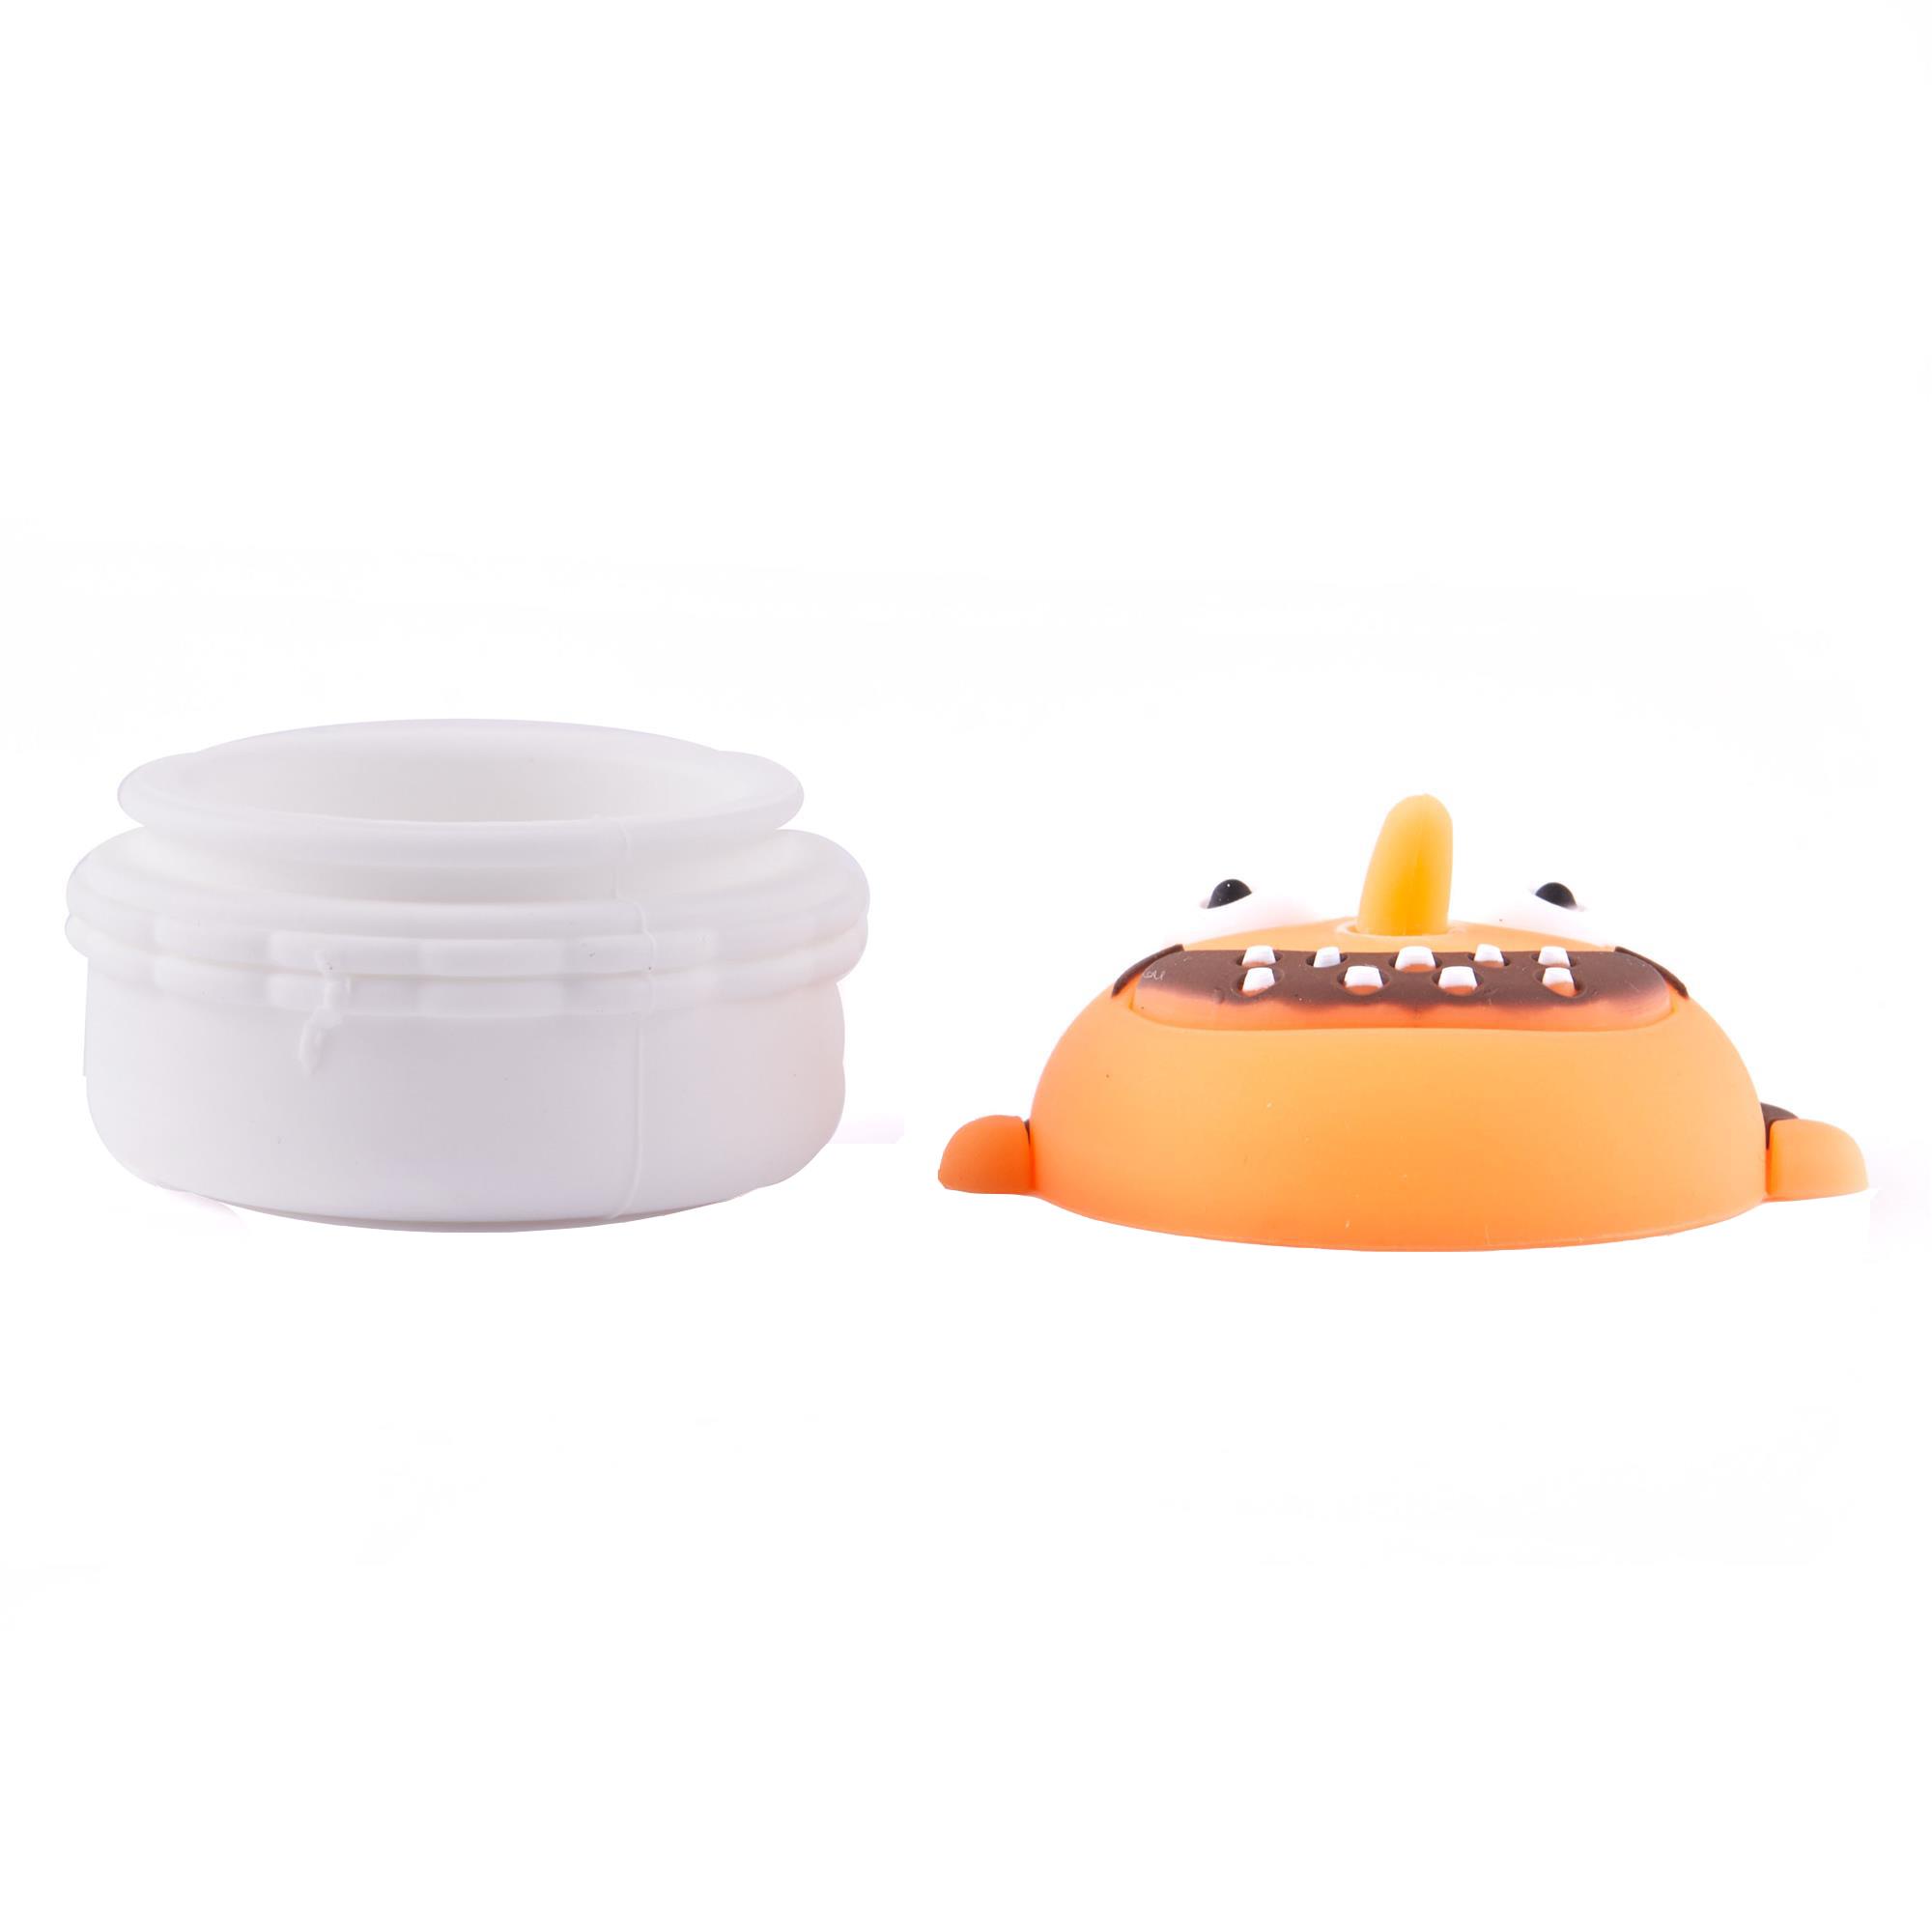 MORTY FACE SILICONE CONTAINER